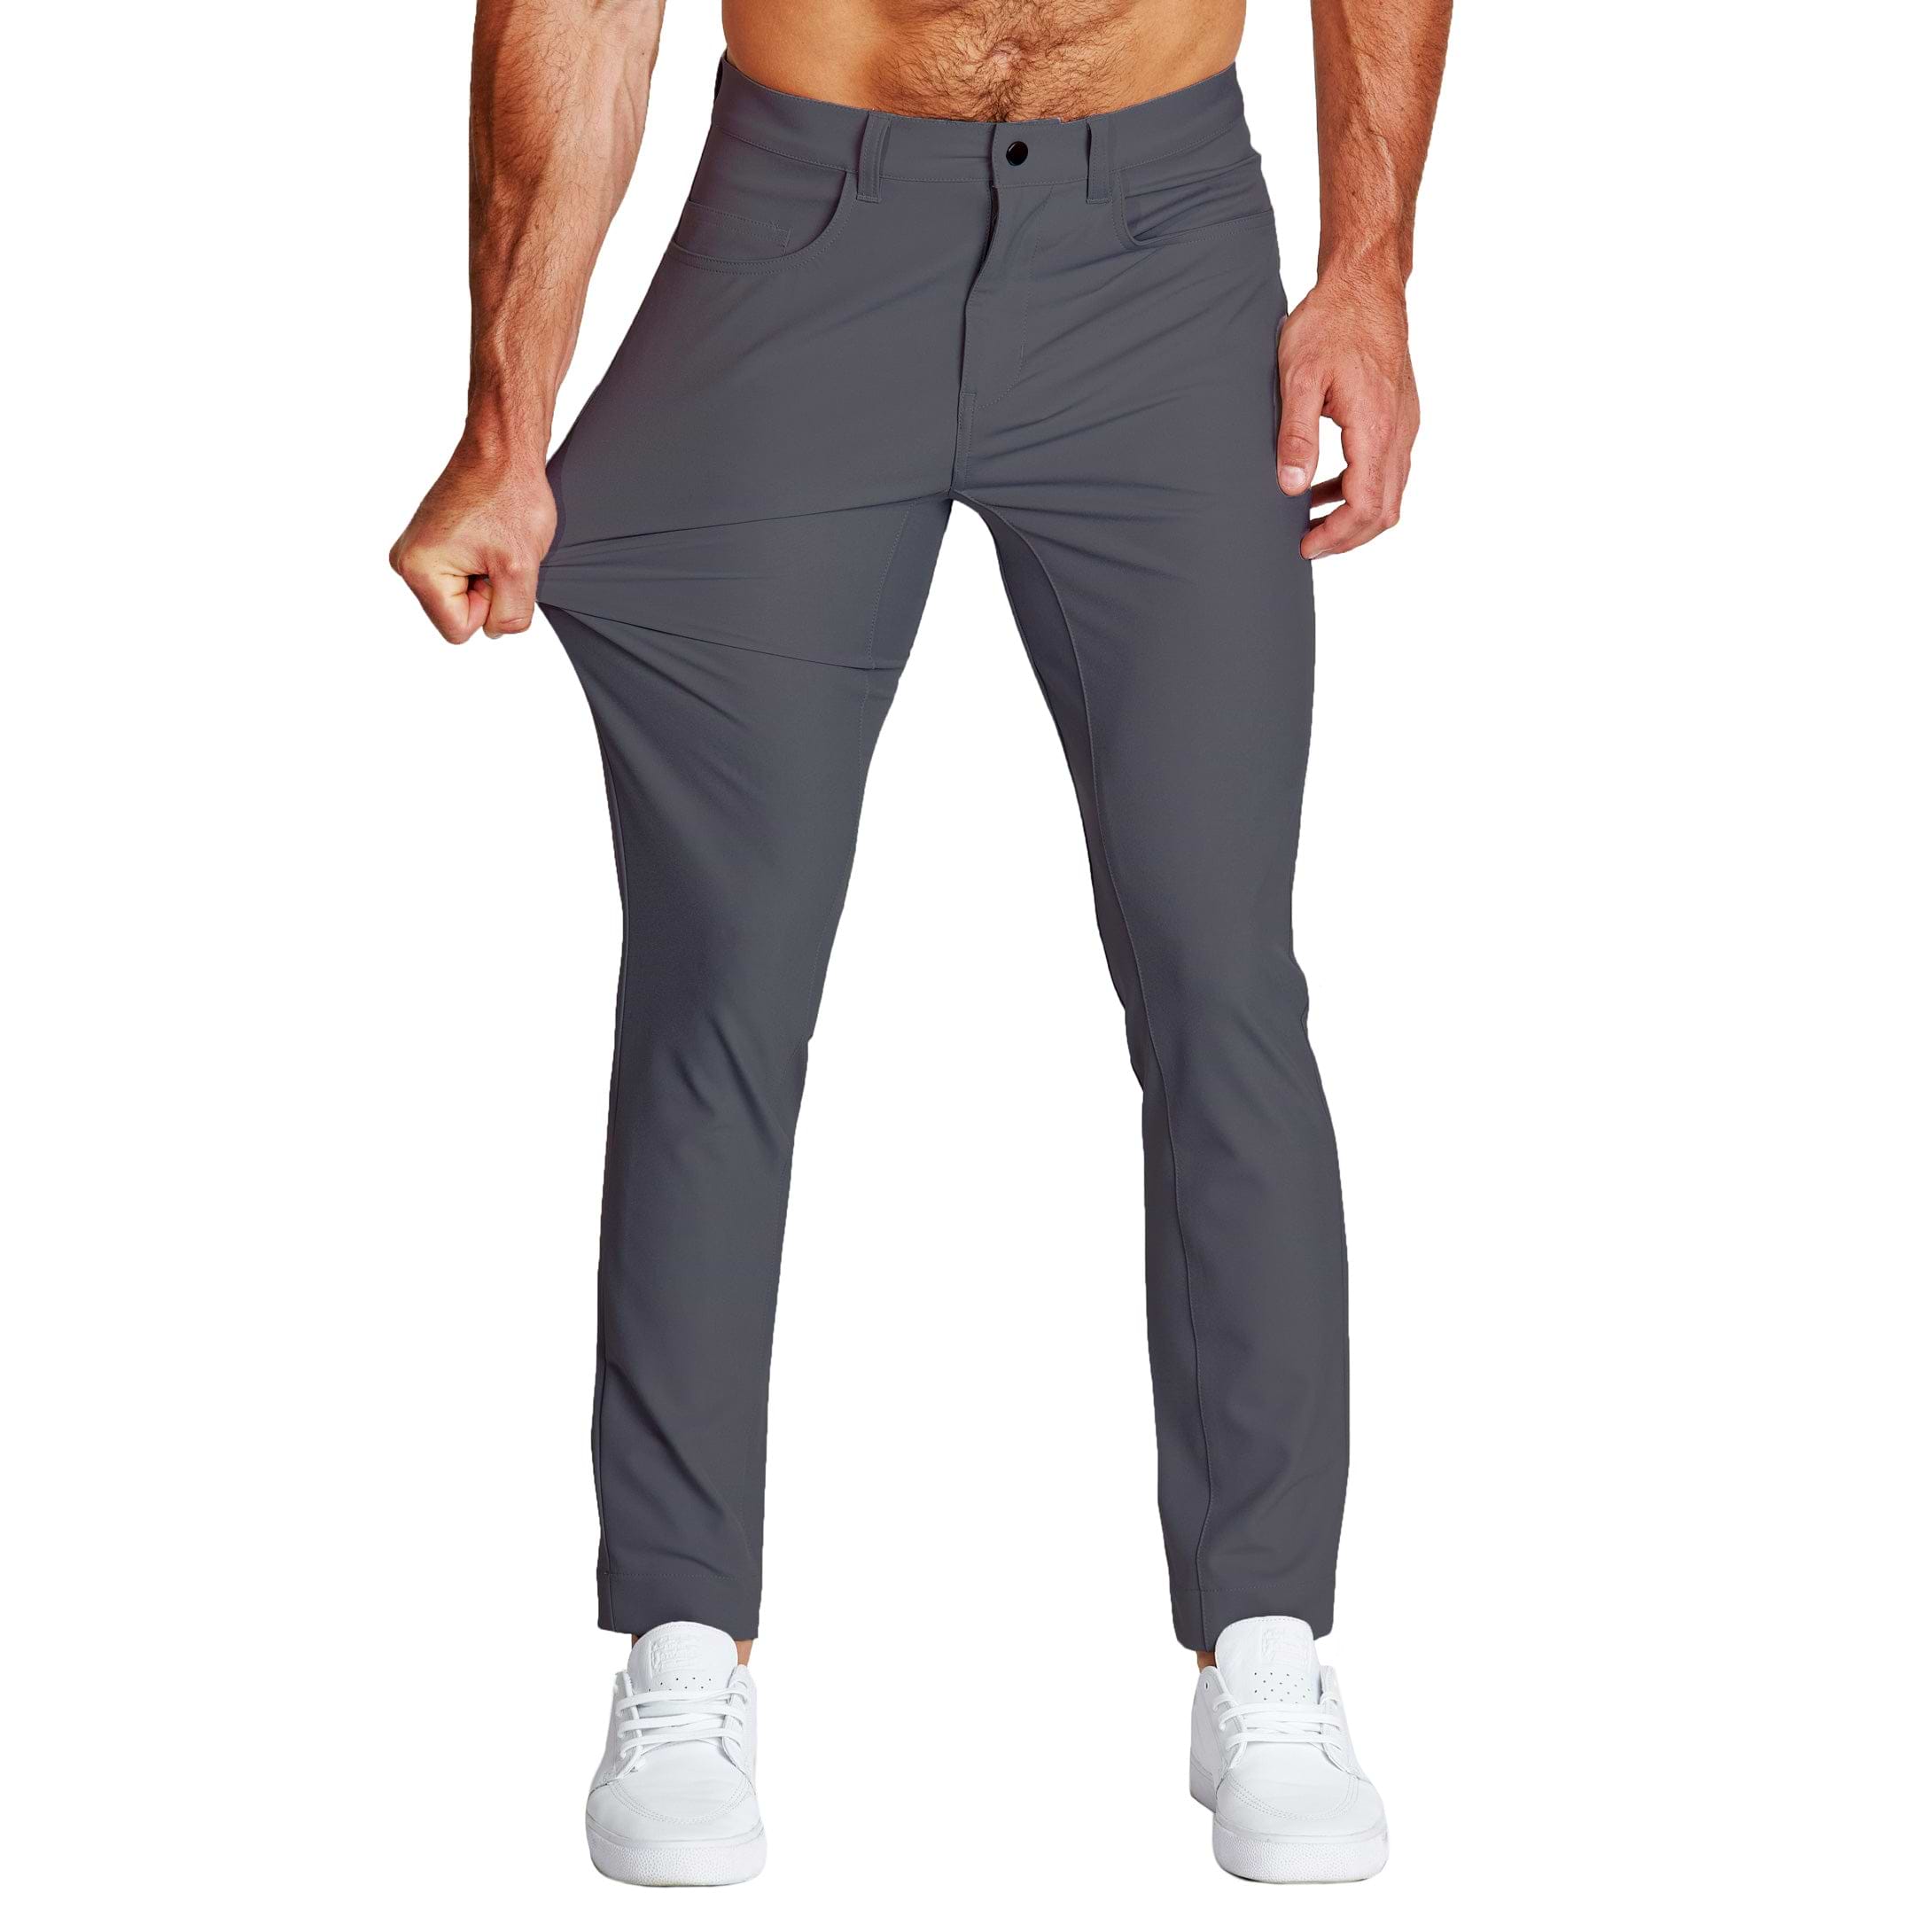 combo slim fit athletic track pants | joggers gym pants for men | casual  running workout